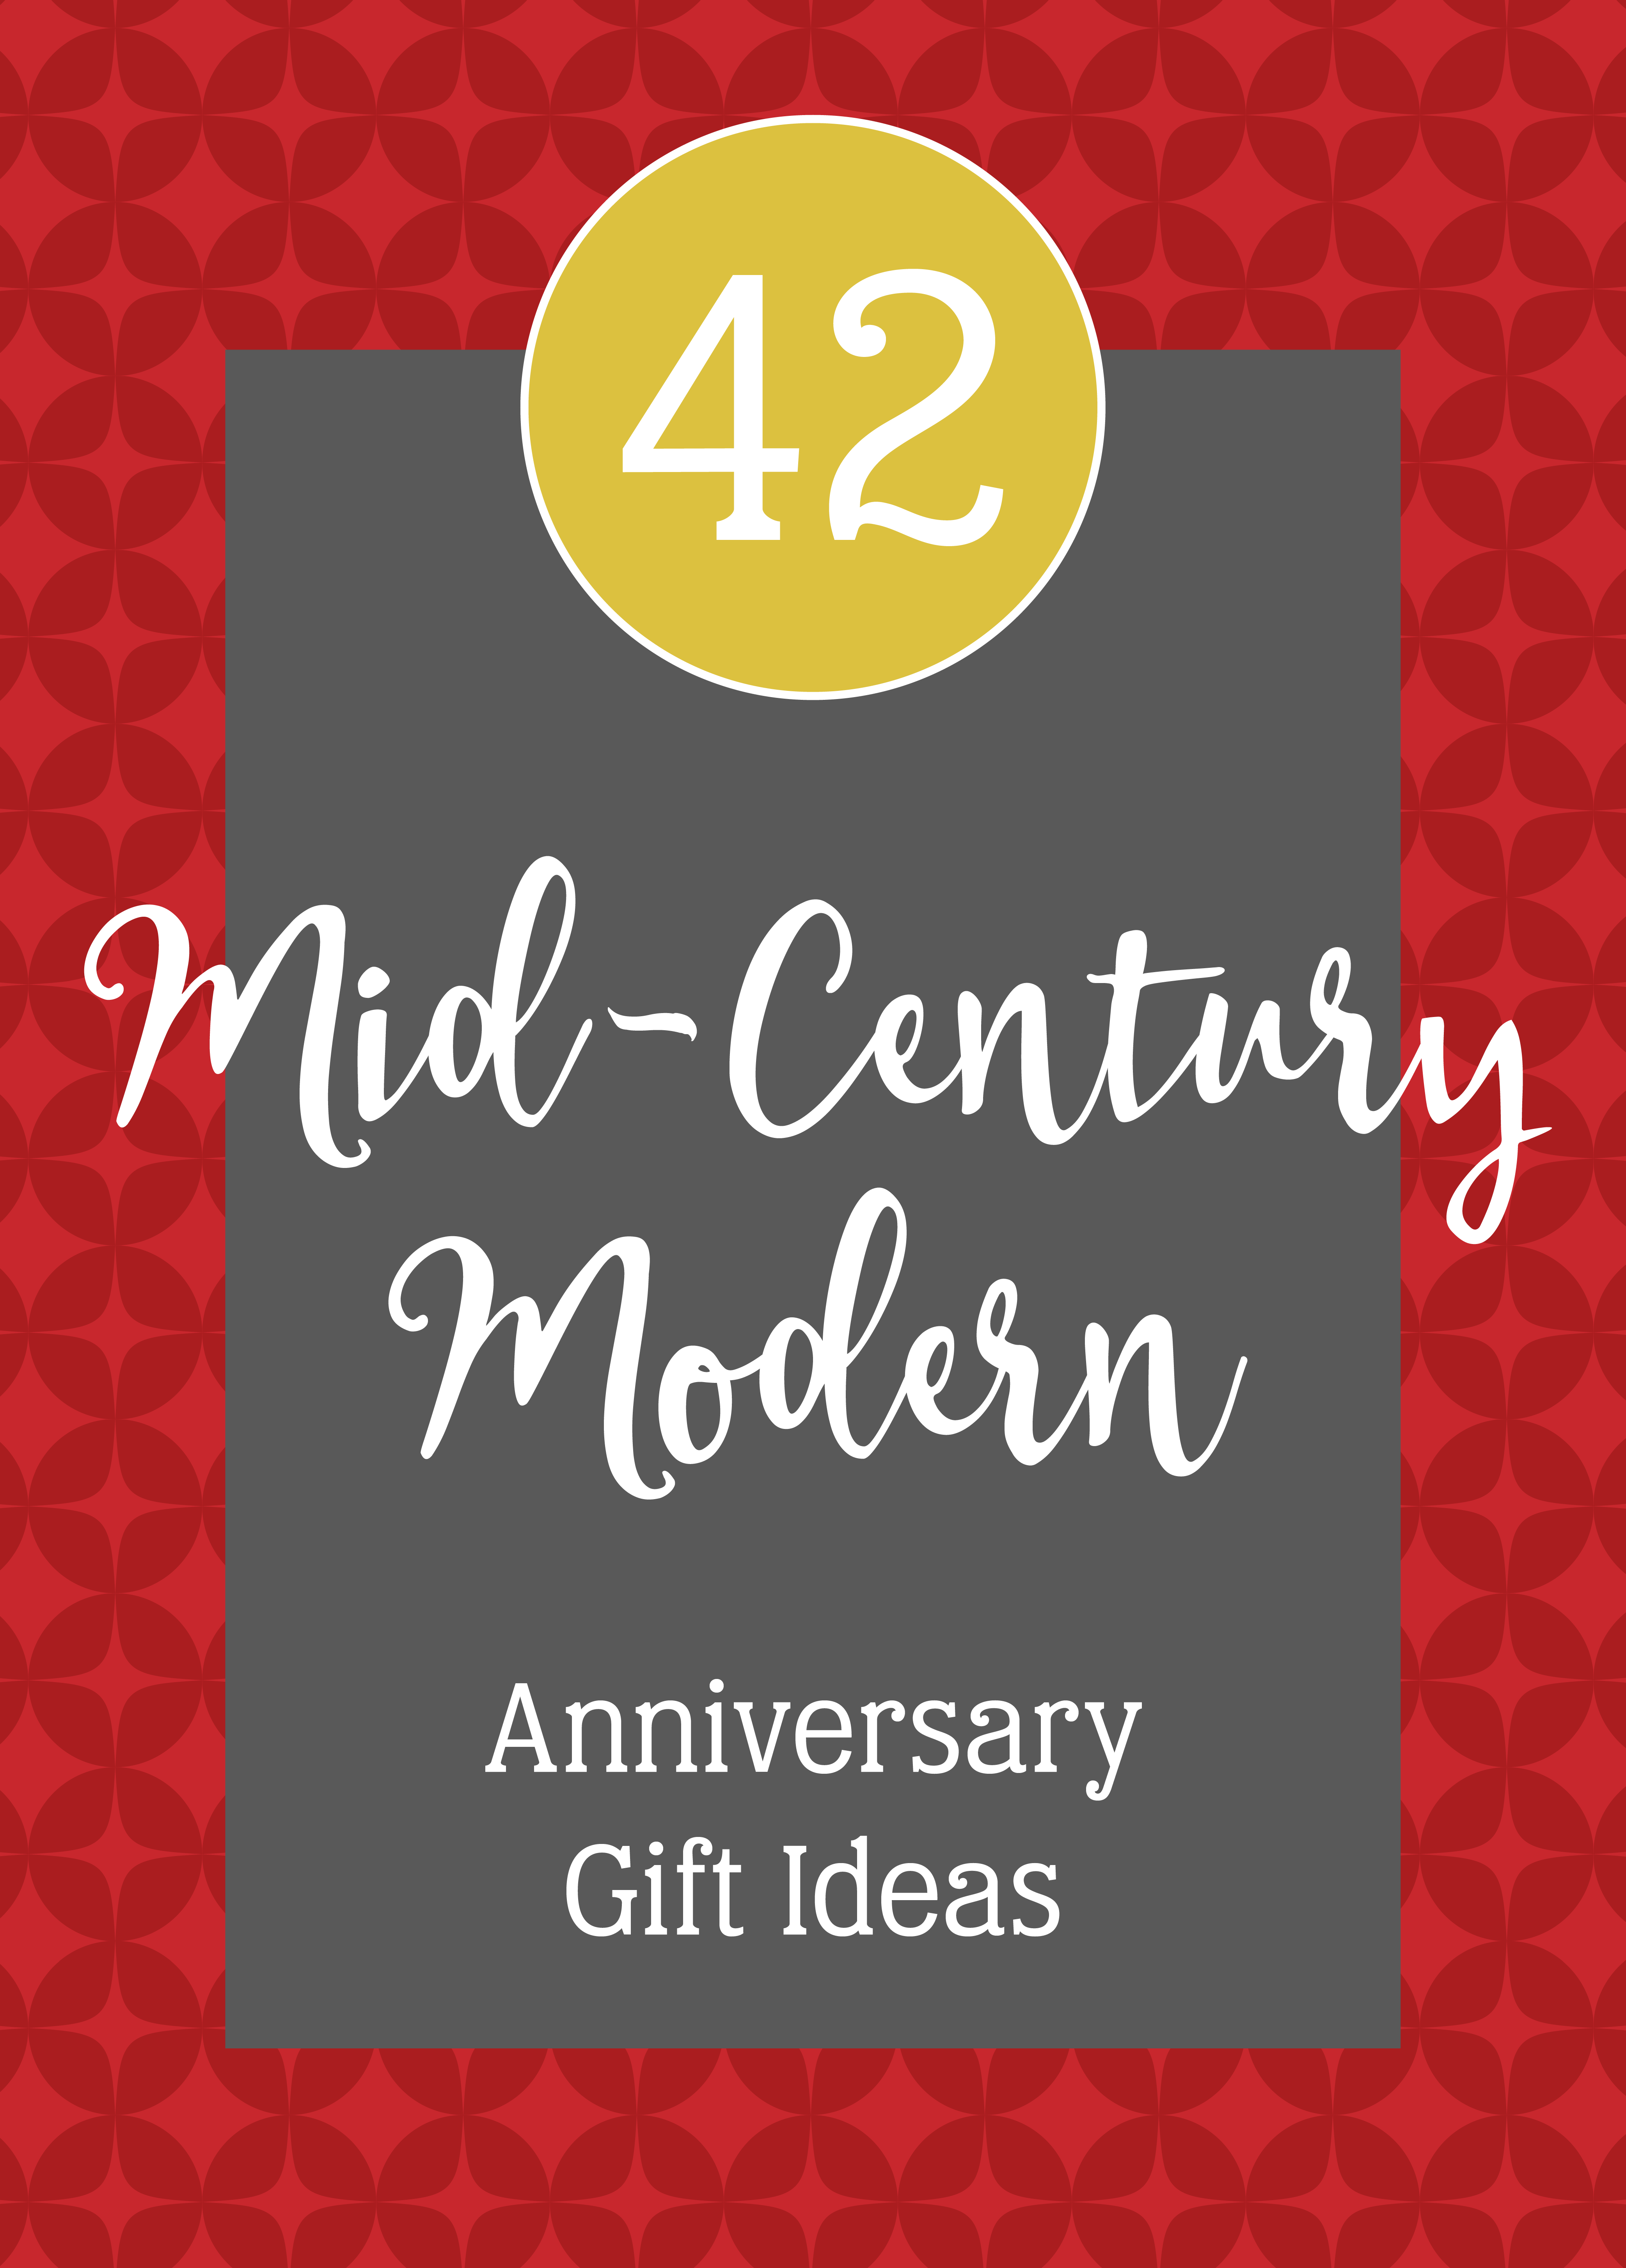 Red background with an abstract geometric pattern and white text that reads "42 Mid-Century Modern Anniversary Gift Ideas"